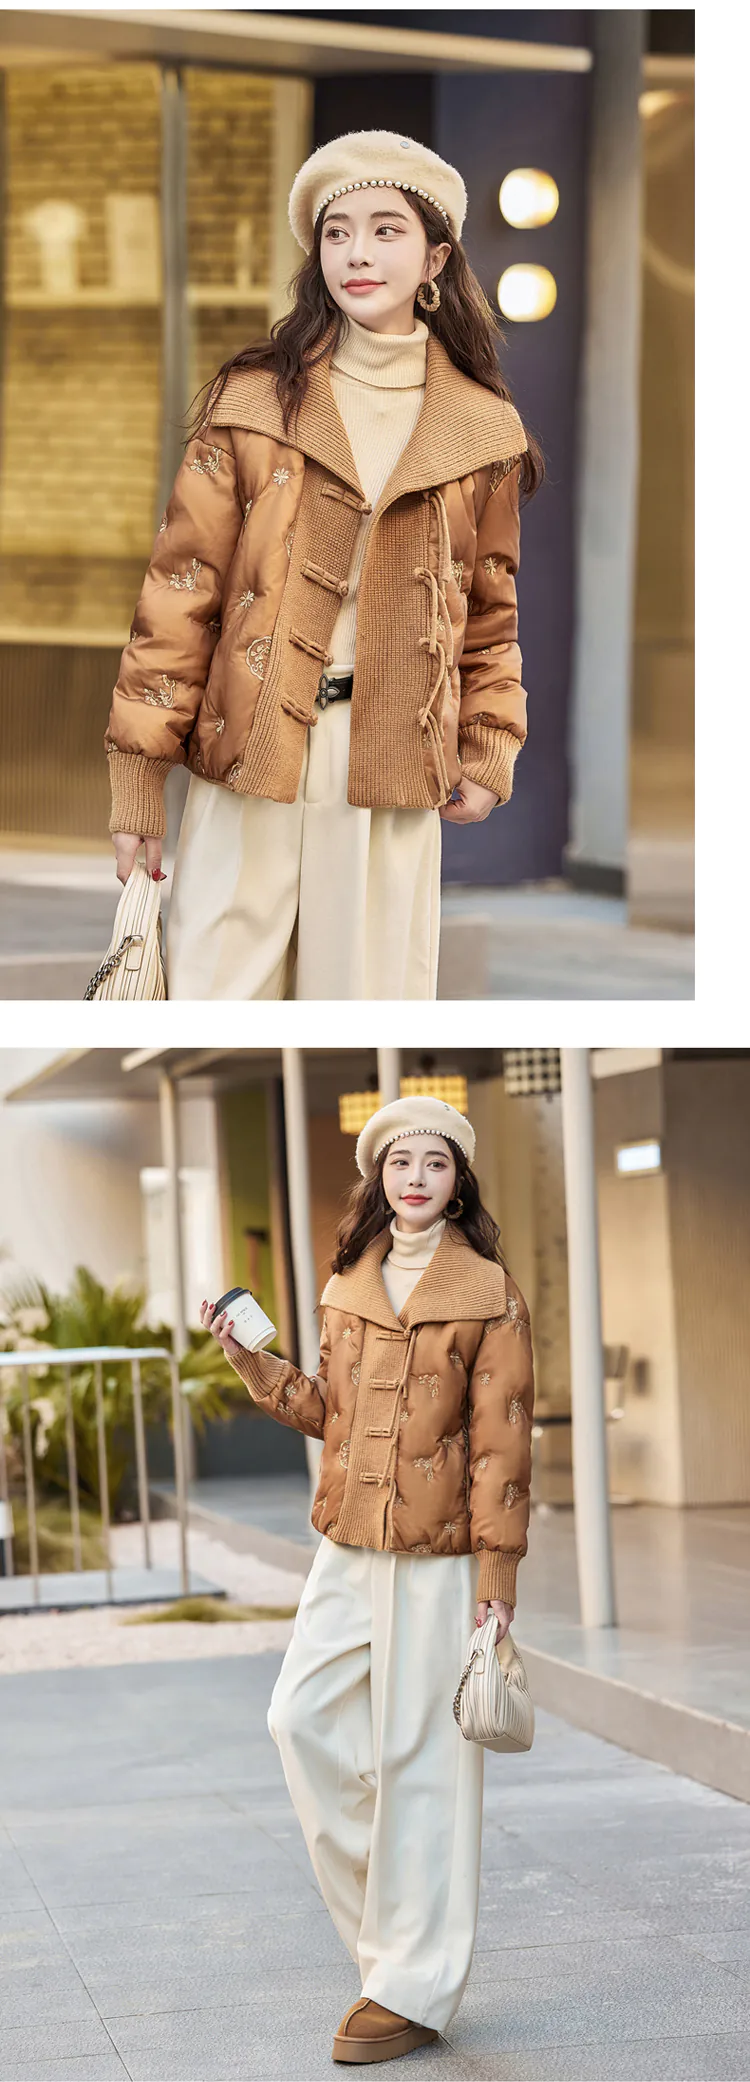 Chic-Vintage-Patchwork-Short-Cotton-Puffer-Jacket-Winter-Casual-Coat19